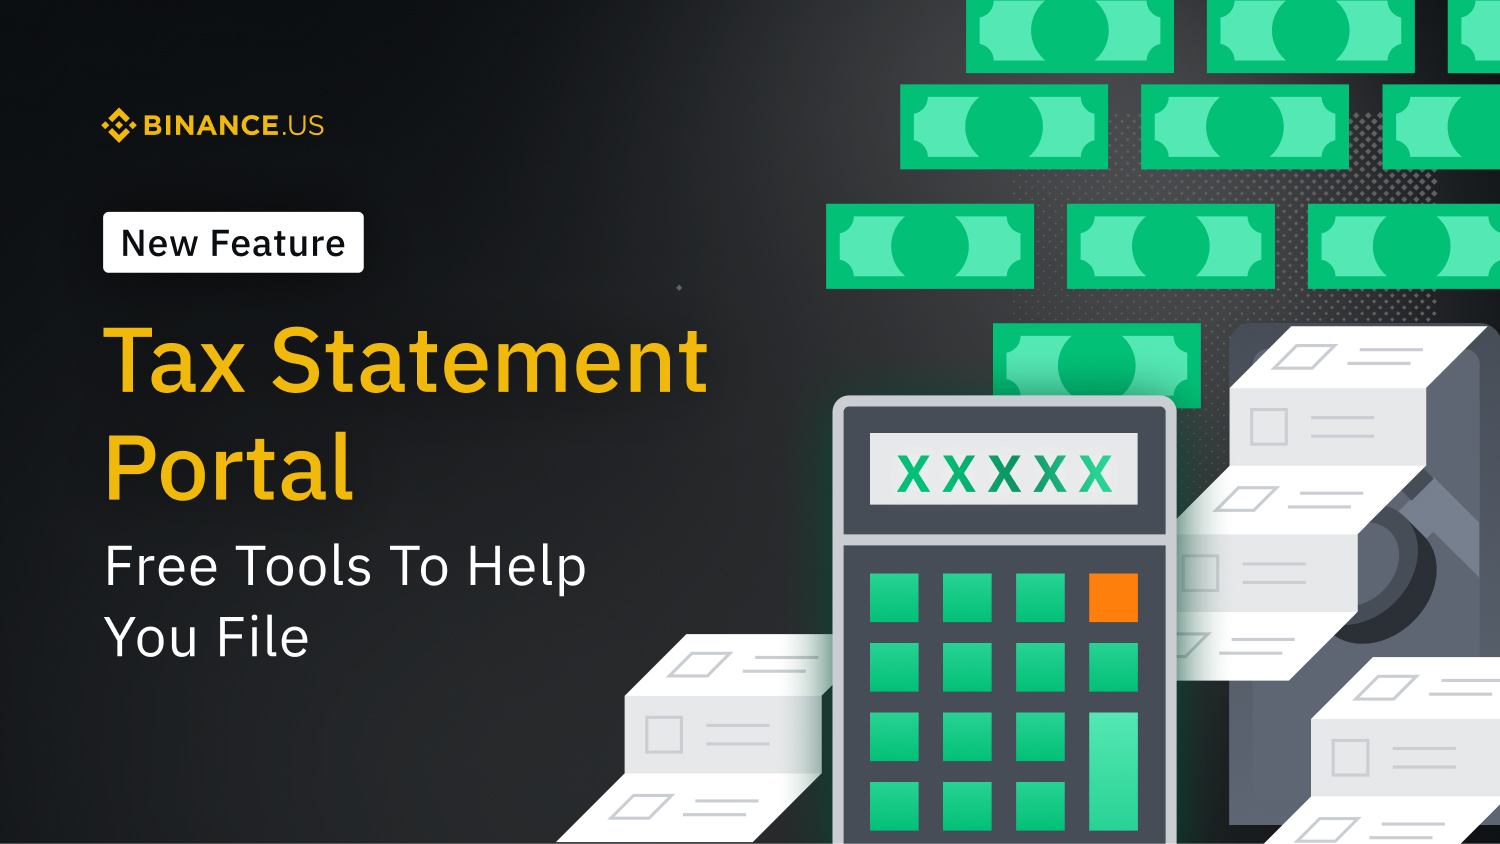 Binance.US Launches Free Tax Statements Portal for the Filing Season